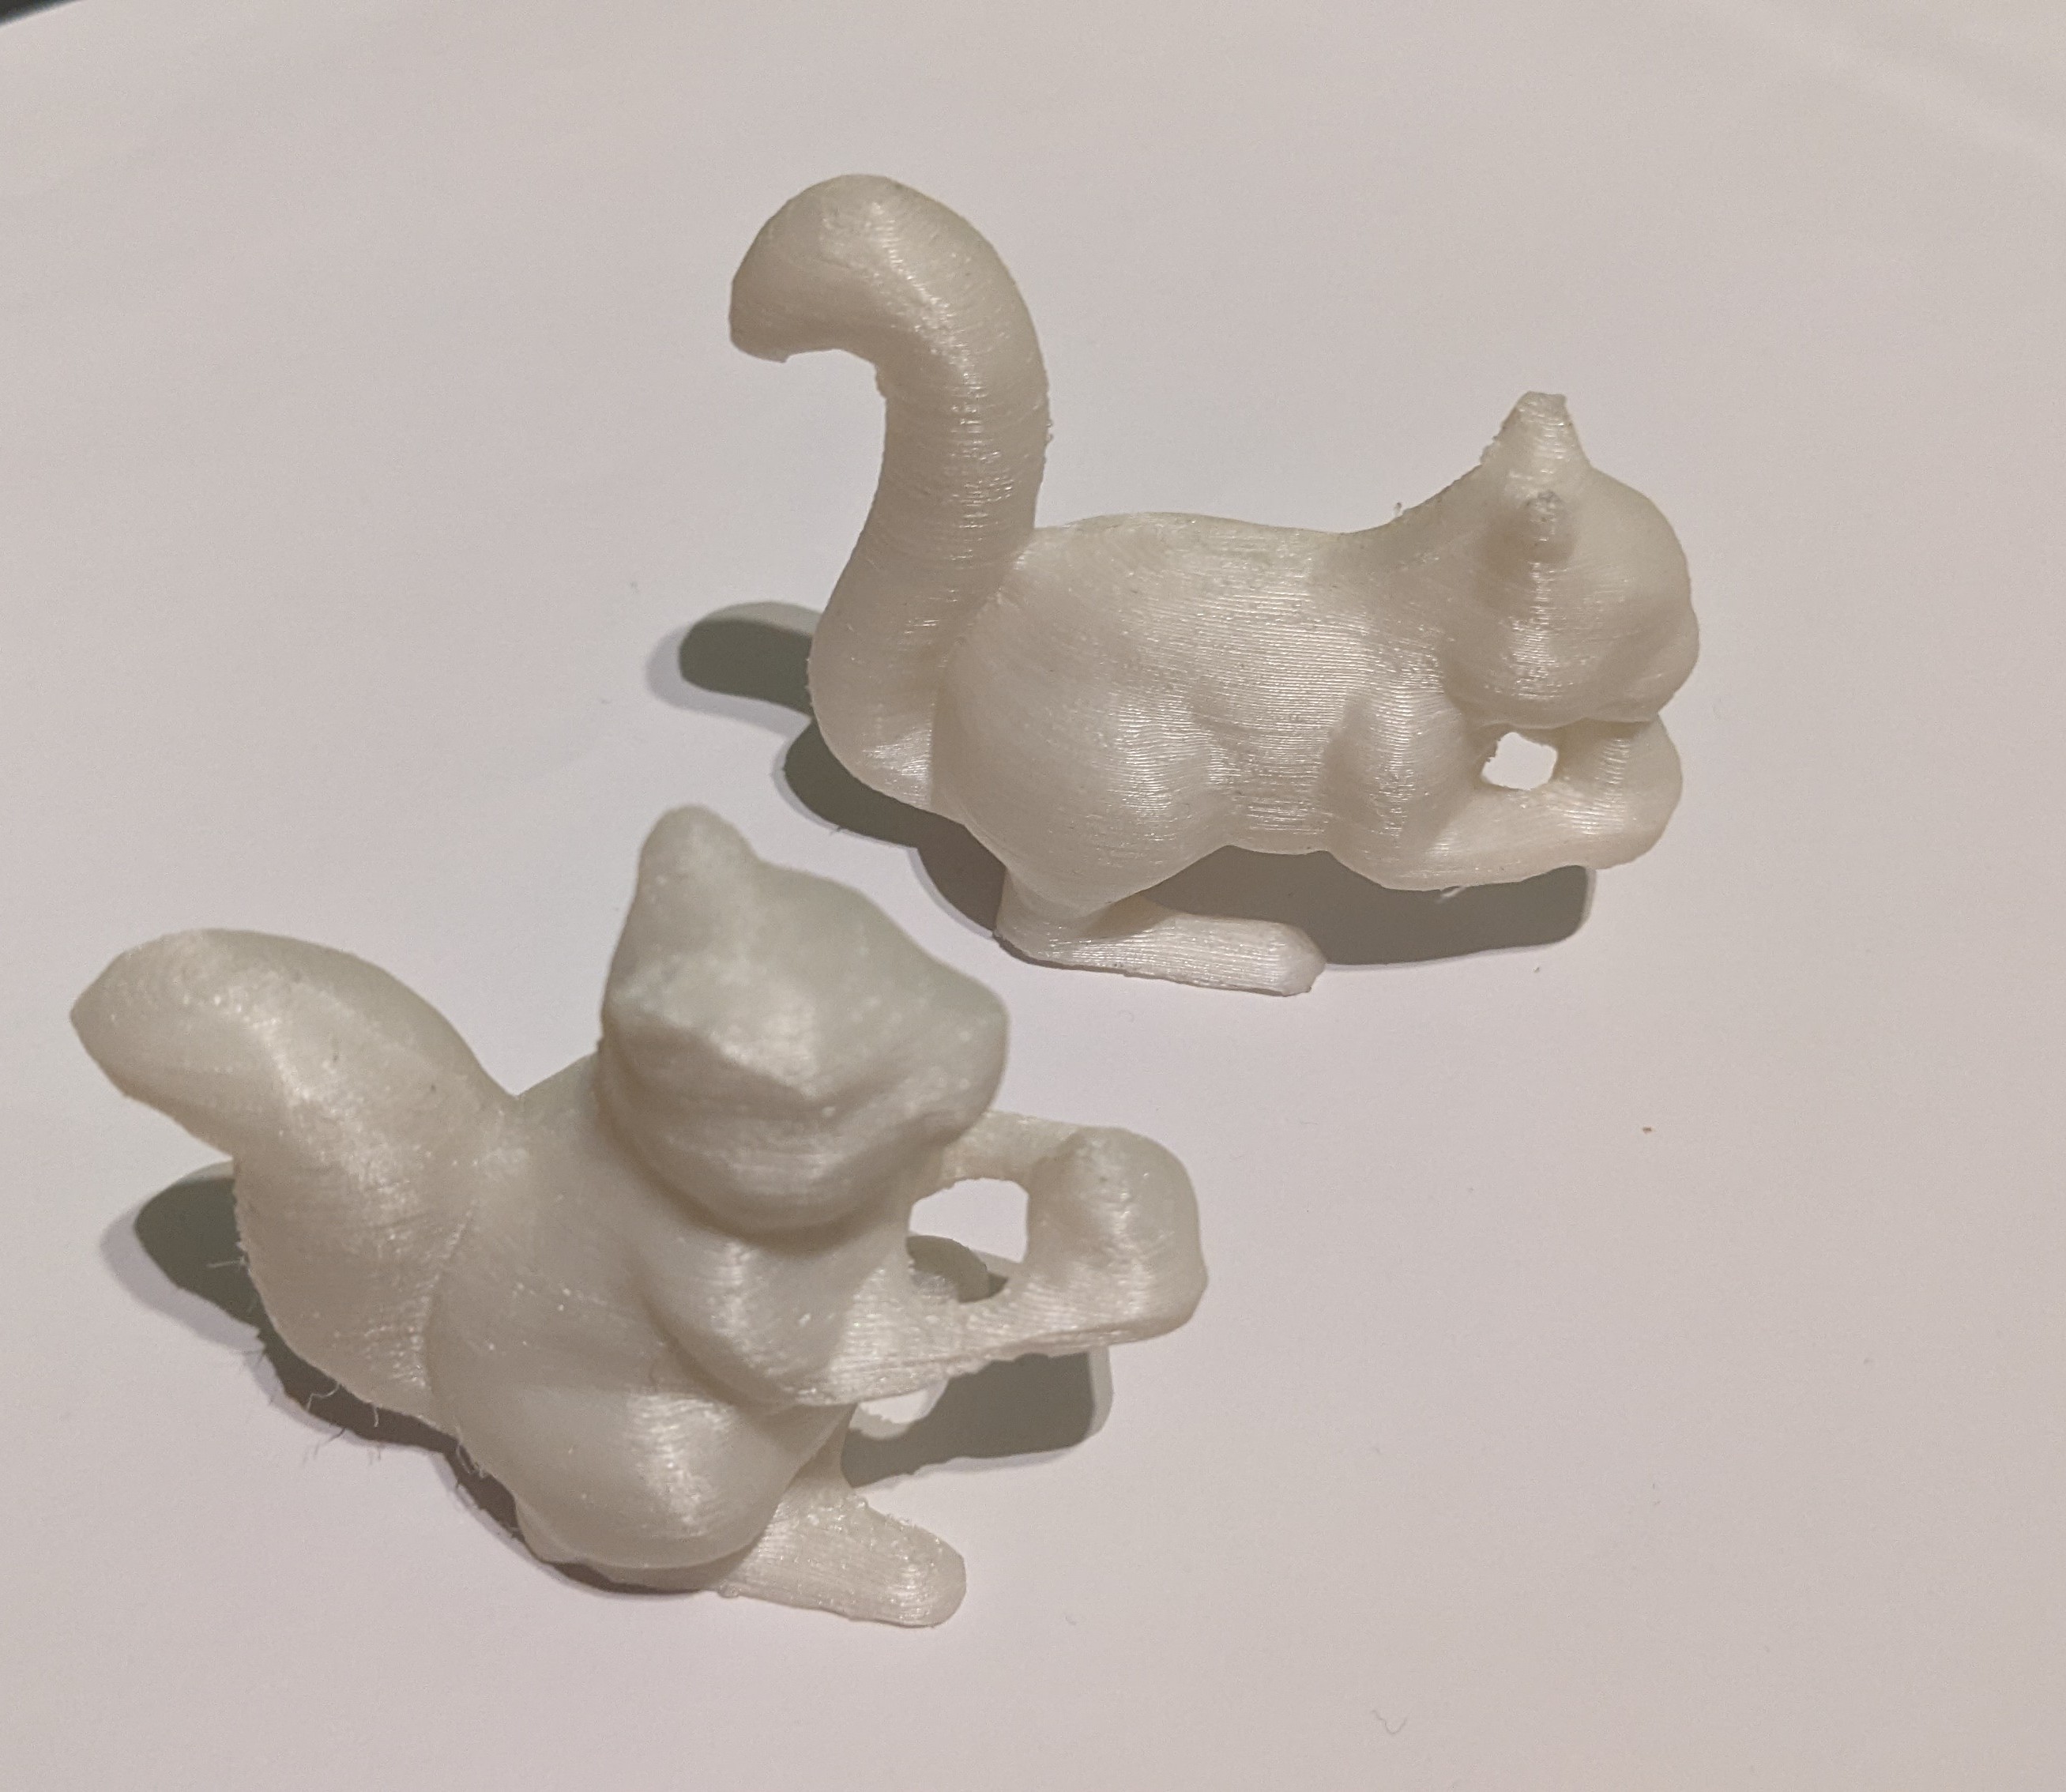 Low poly squirrel figurines